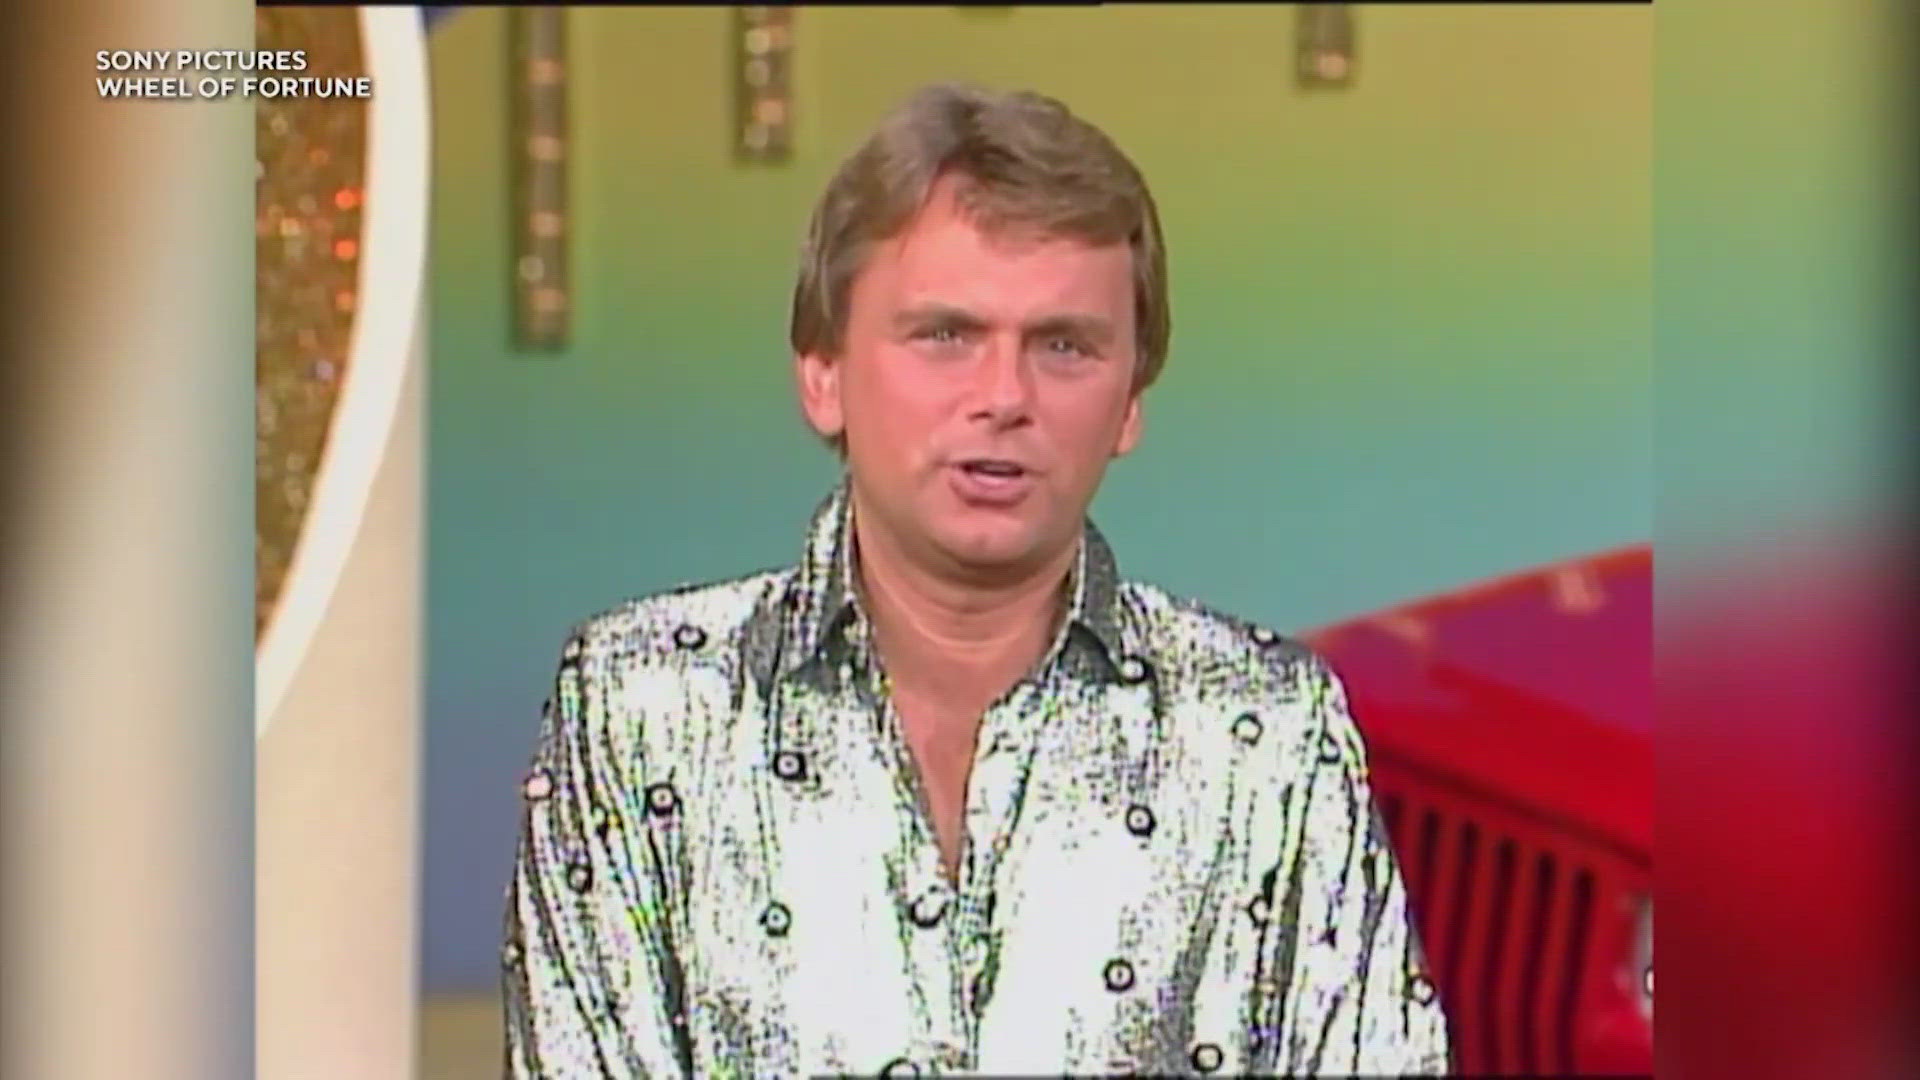 At 77, Sajak is closing out his remarkable 41-year career as one of the most popular game show hosts in American television history.